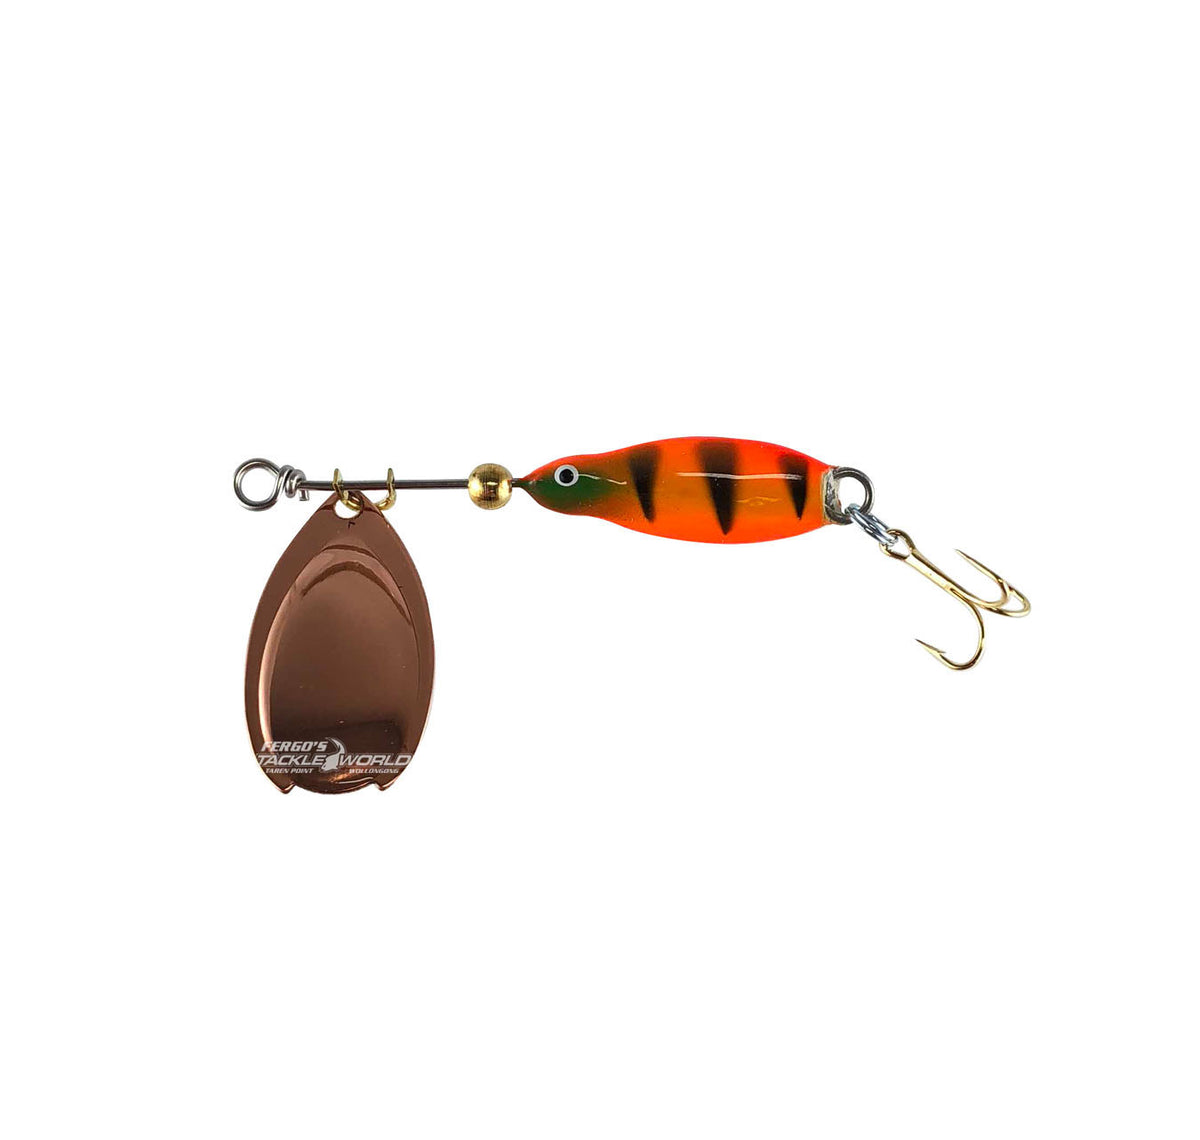 Nils Master Lotto Spinner 6g Lures